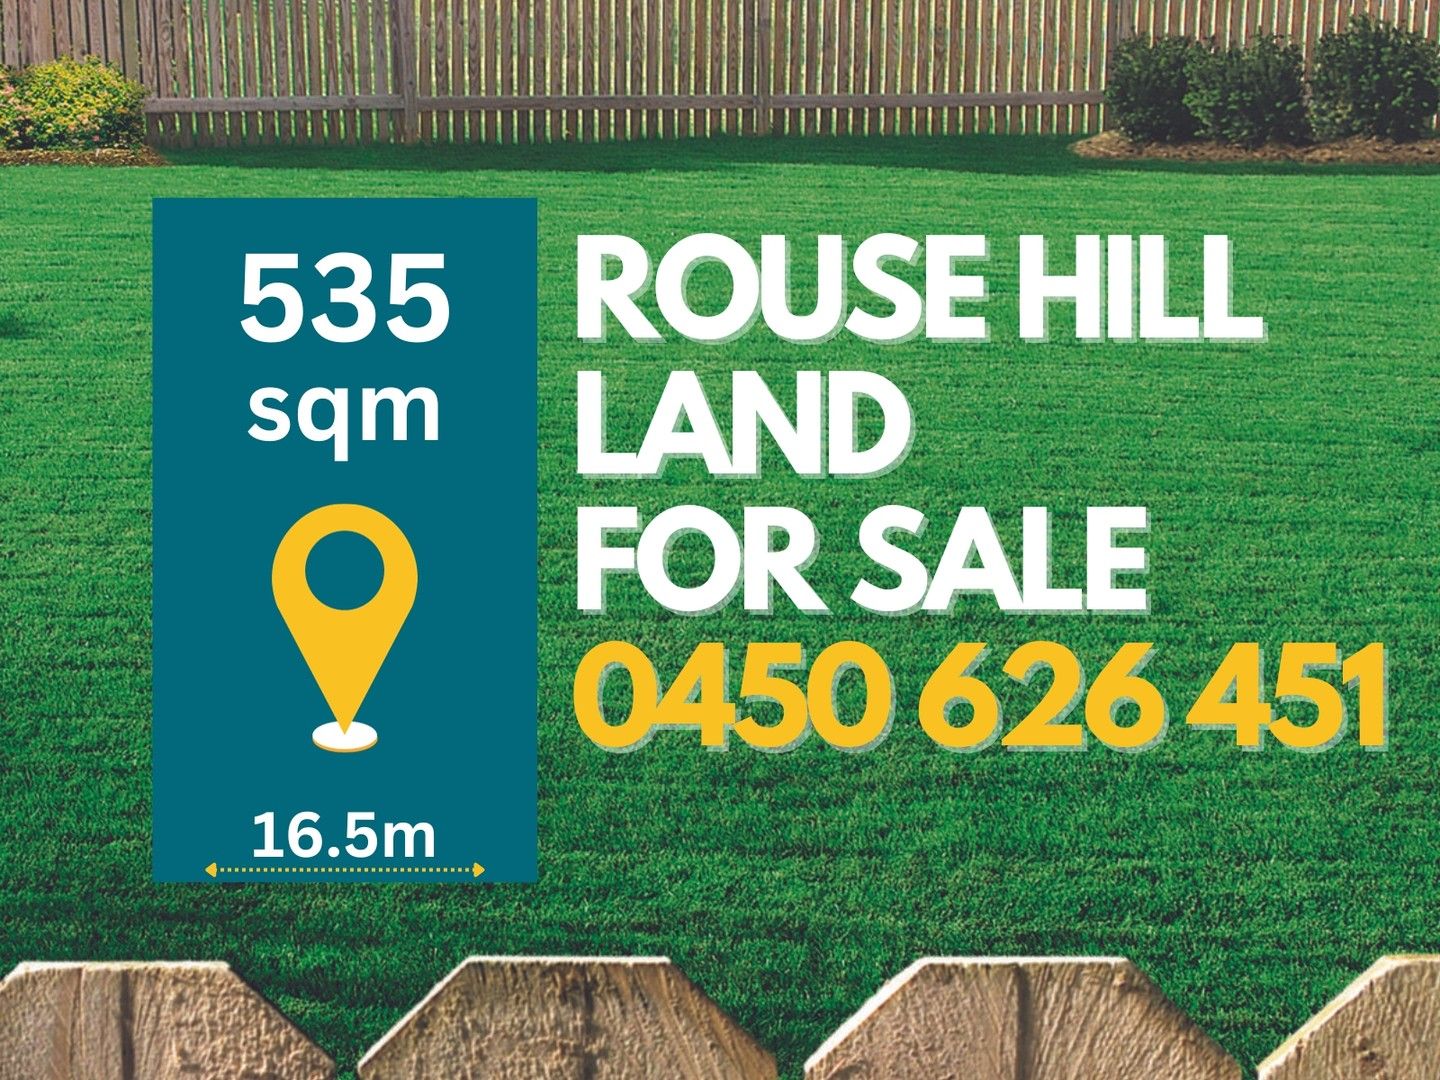 New land in 16.5m Frontage, Secure Now With Only 5% Deposit, ROUSE HILL NSW, 2155